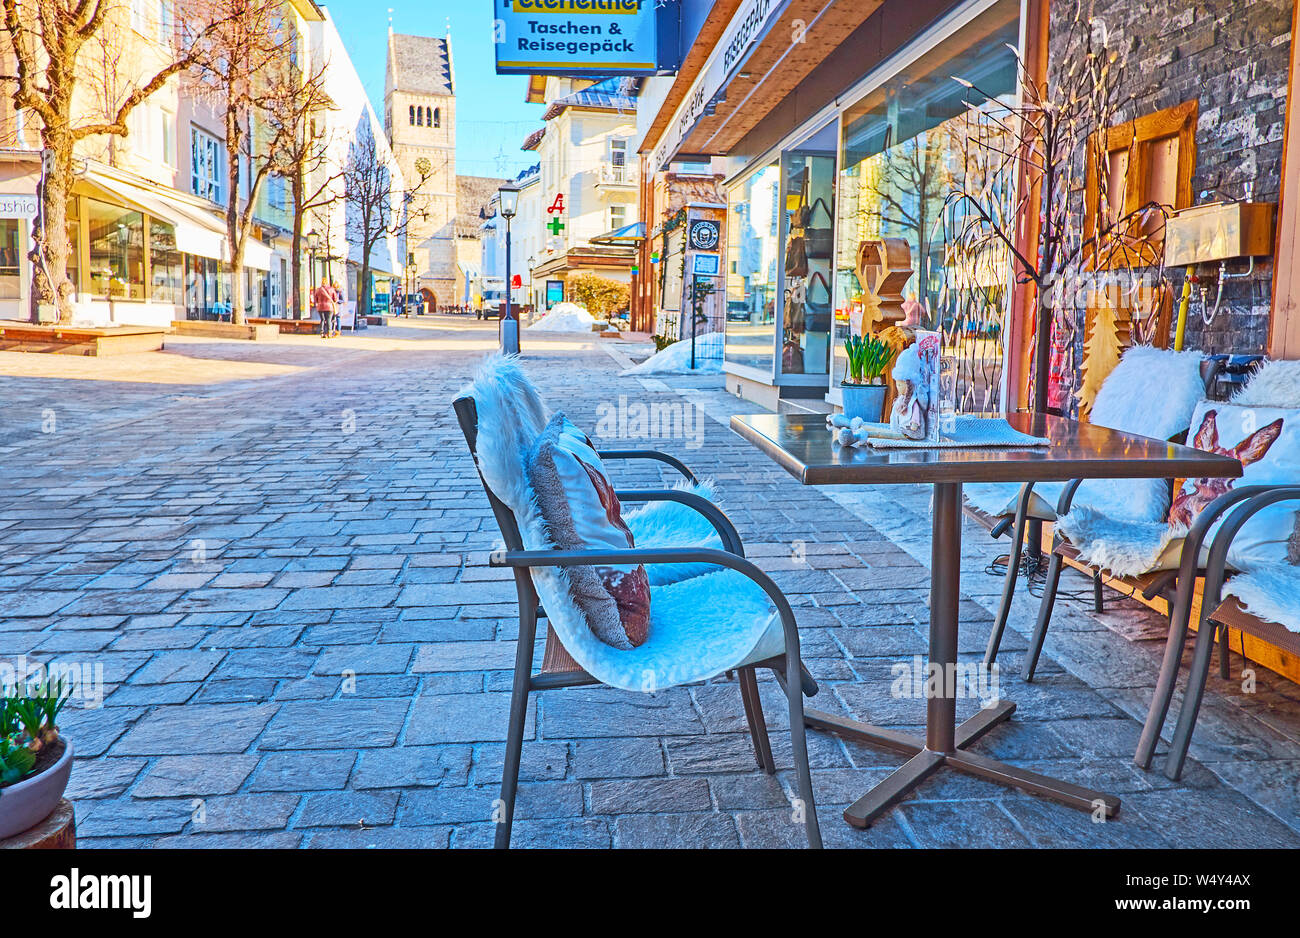 ZELL AM SEE, AUSTRIA - FEBRUARY 28, 2019: Enjoy the open air terrace of cafe in main shopping street of Zell am See resort - Bahnhofstrasse, on Februa Stock Photo